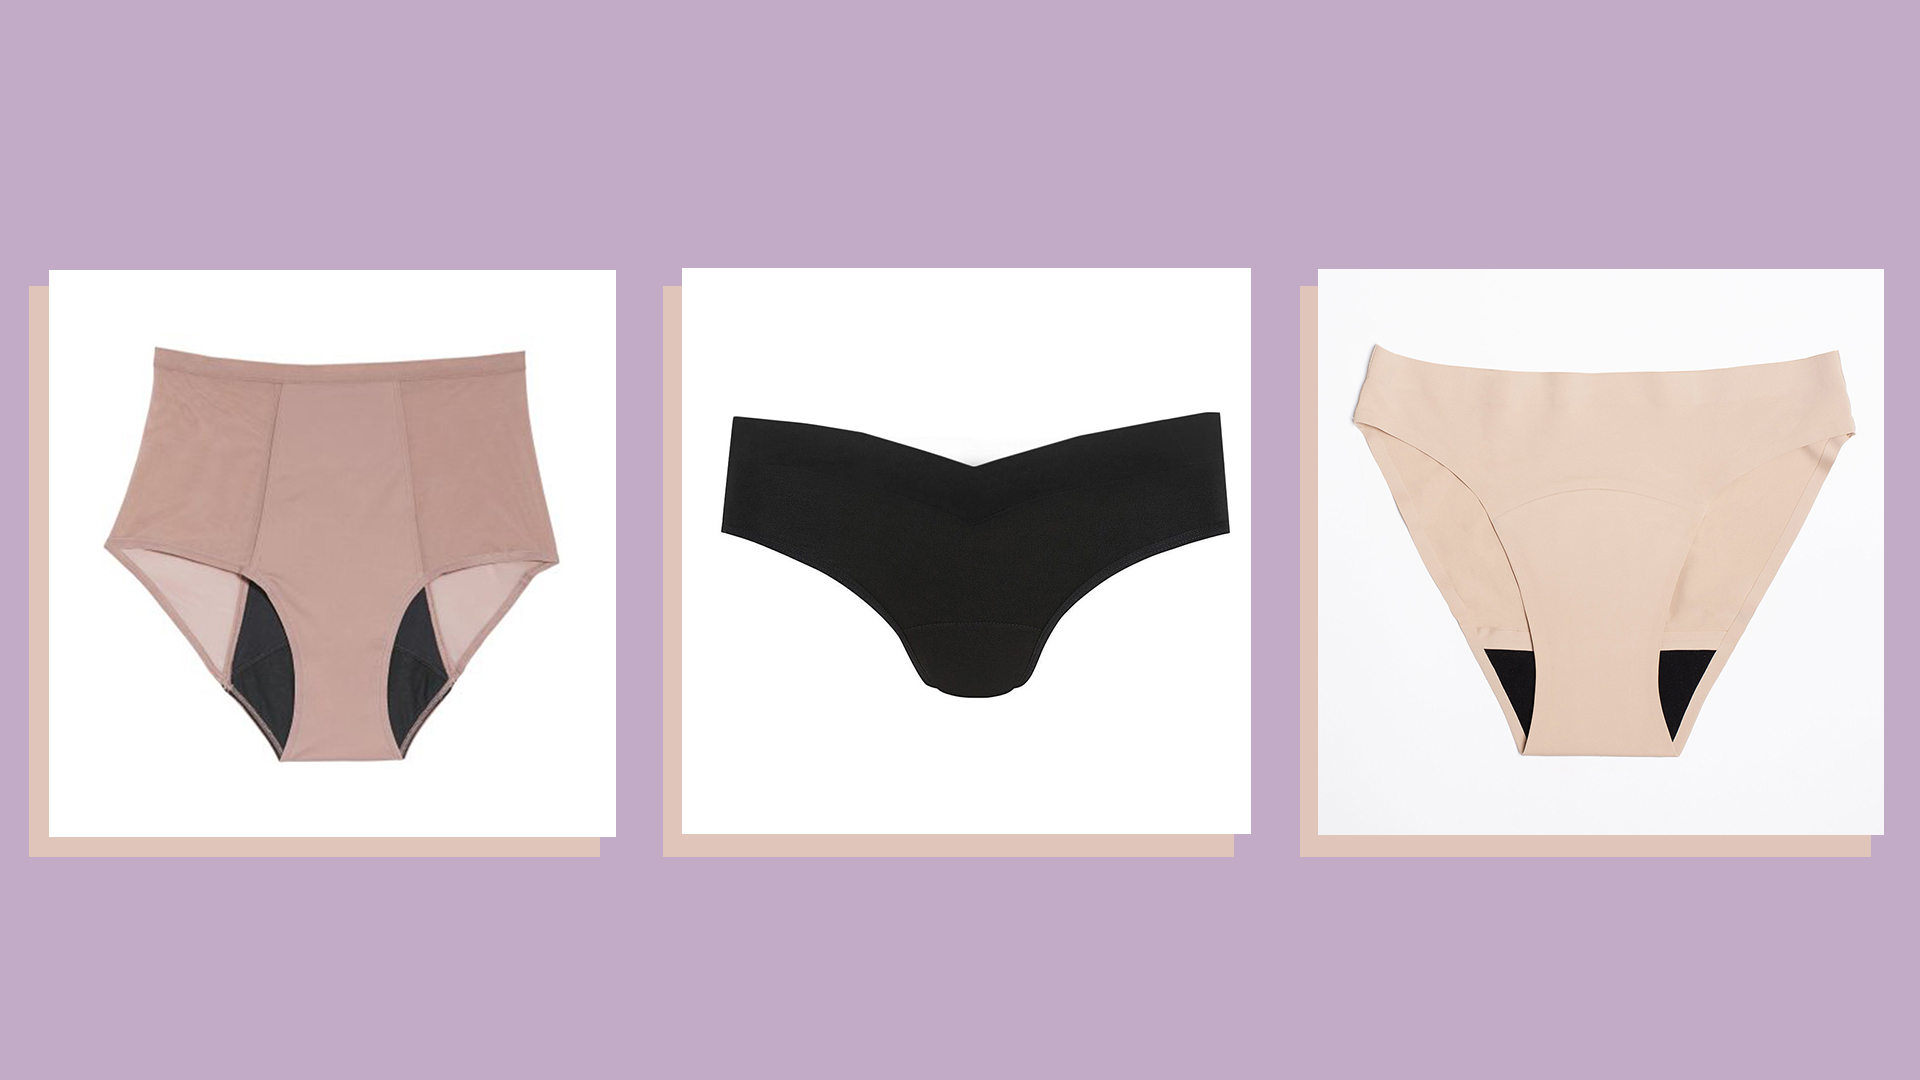 So what do you THINX about period panties?, by Summer Lovin